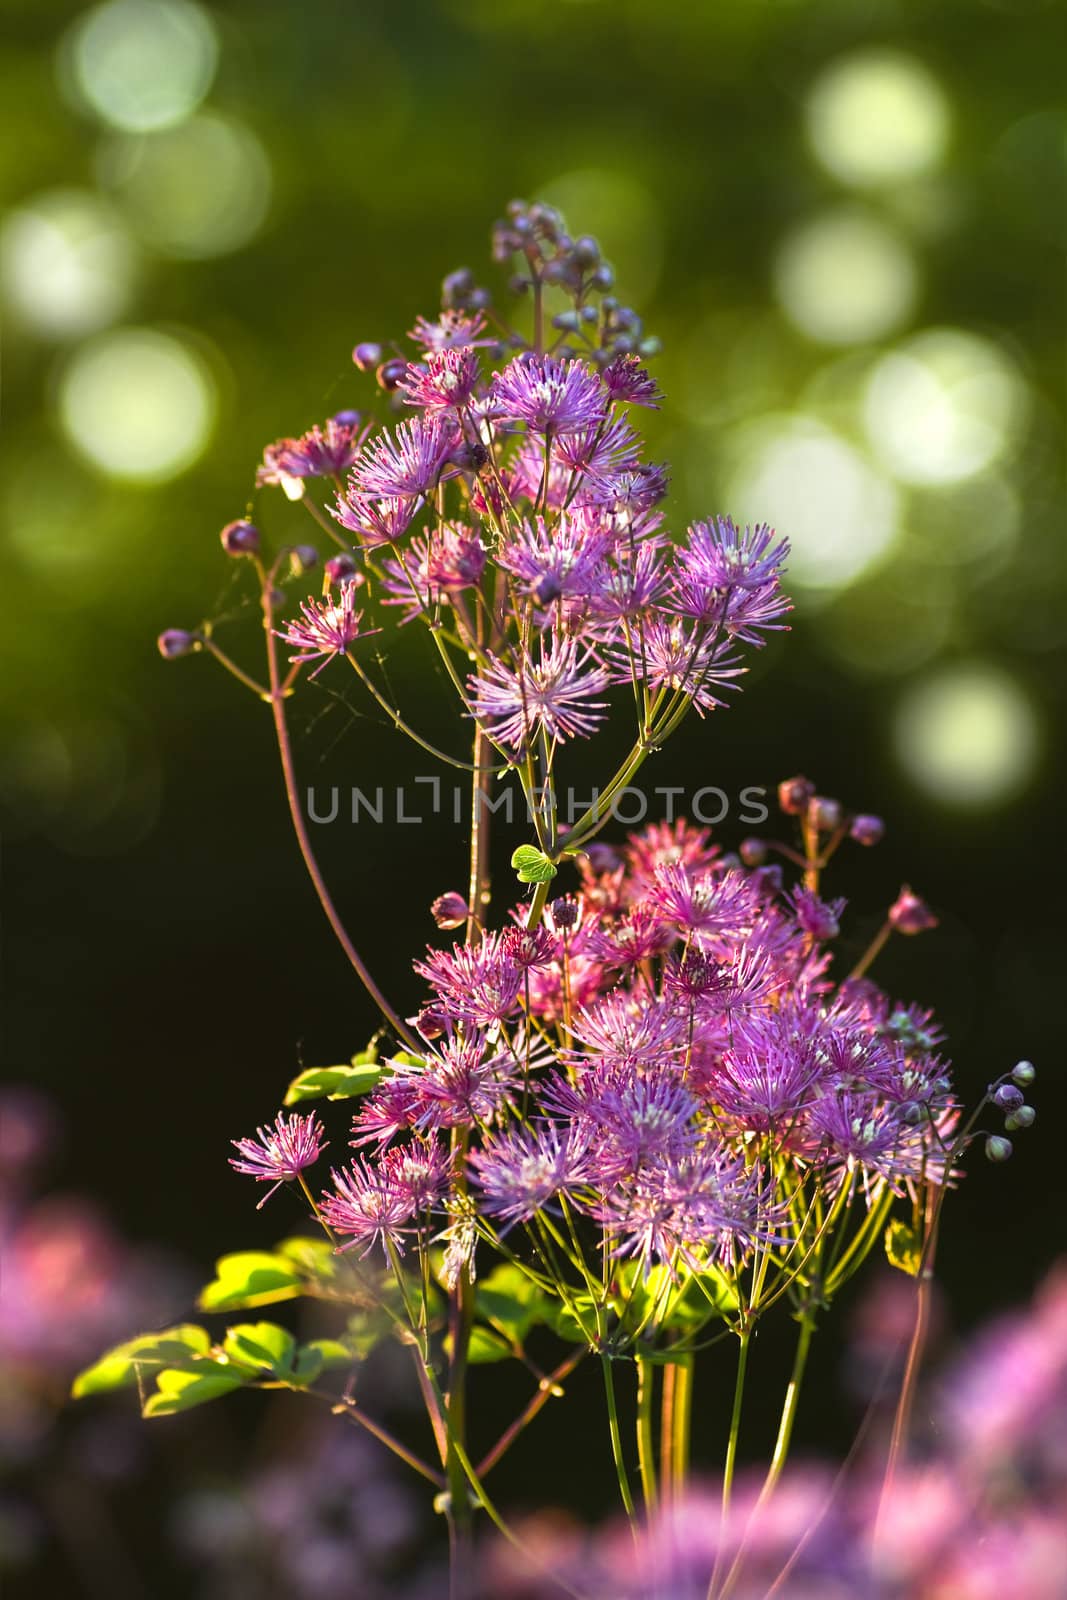 Greater- or Columbine Meadow Rue in spring by Colette